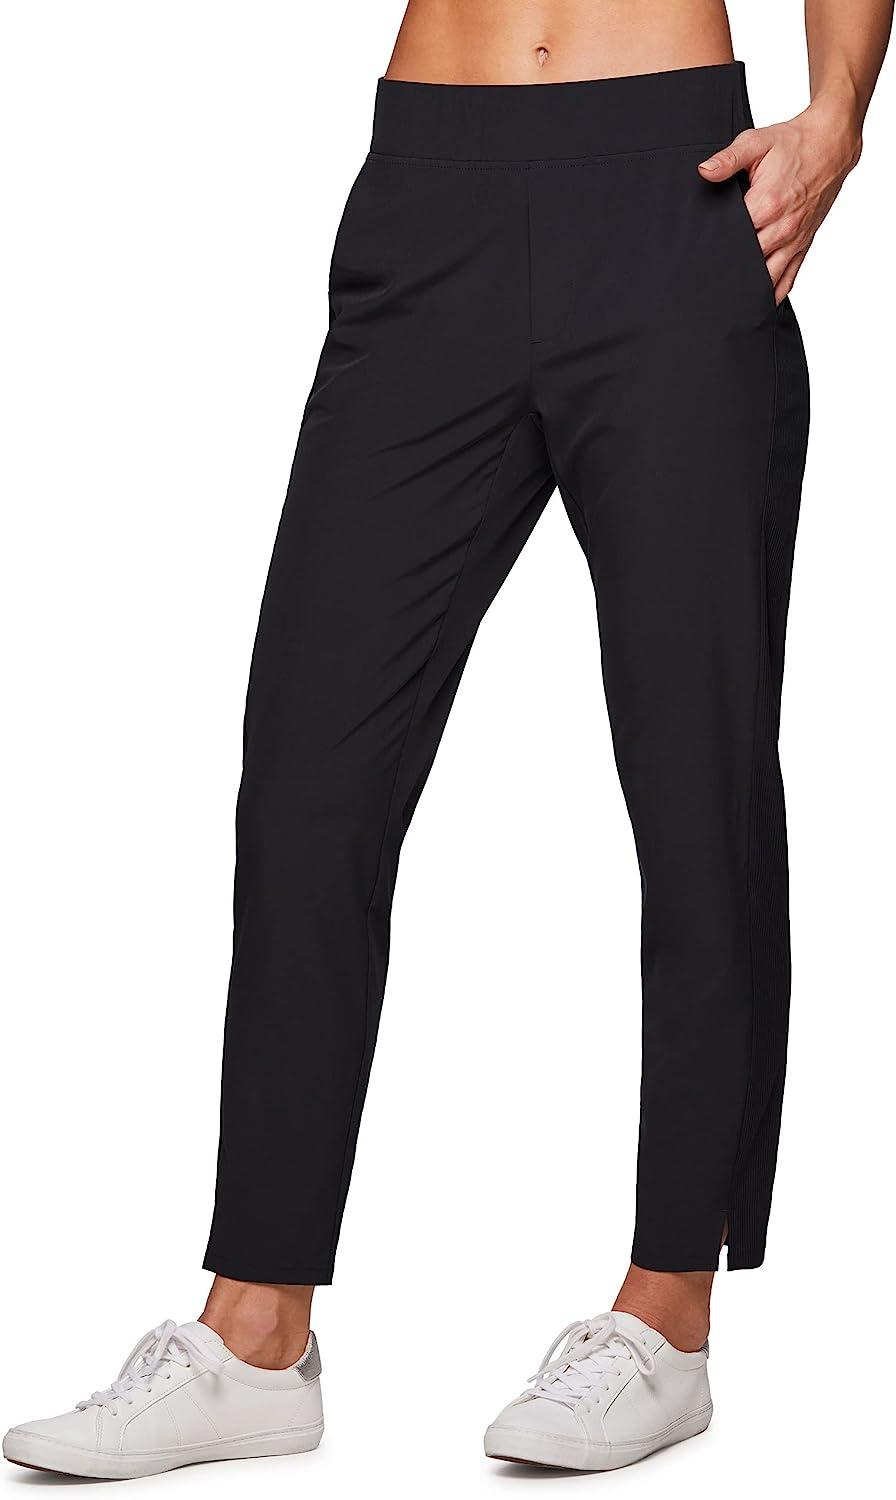 RBX Gray Active Pants Size S - 74% off